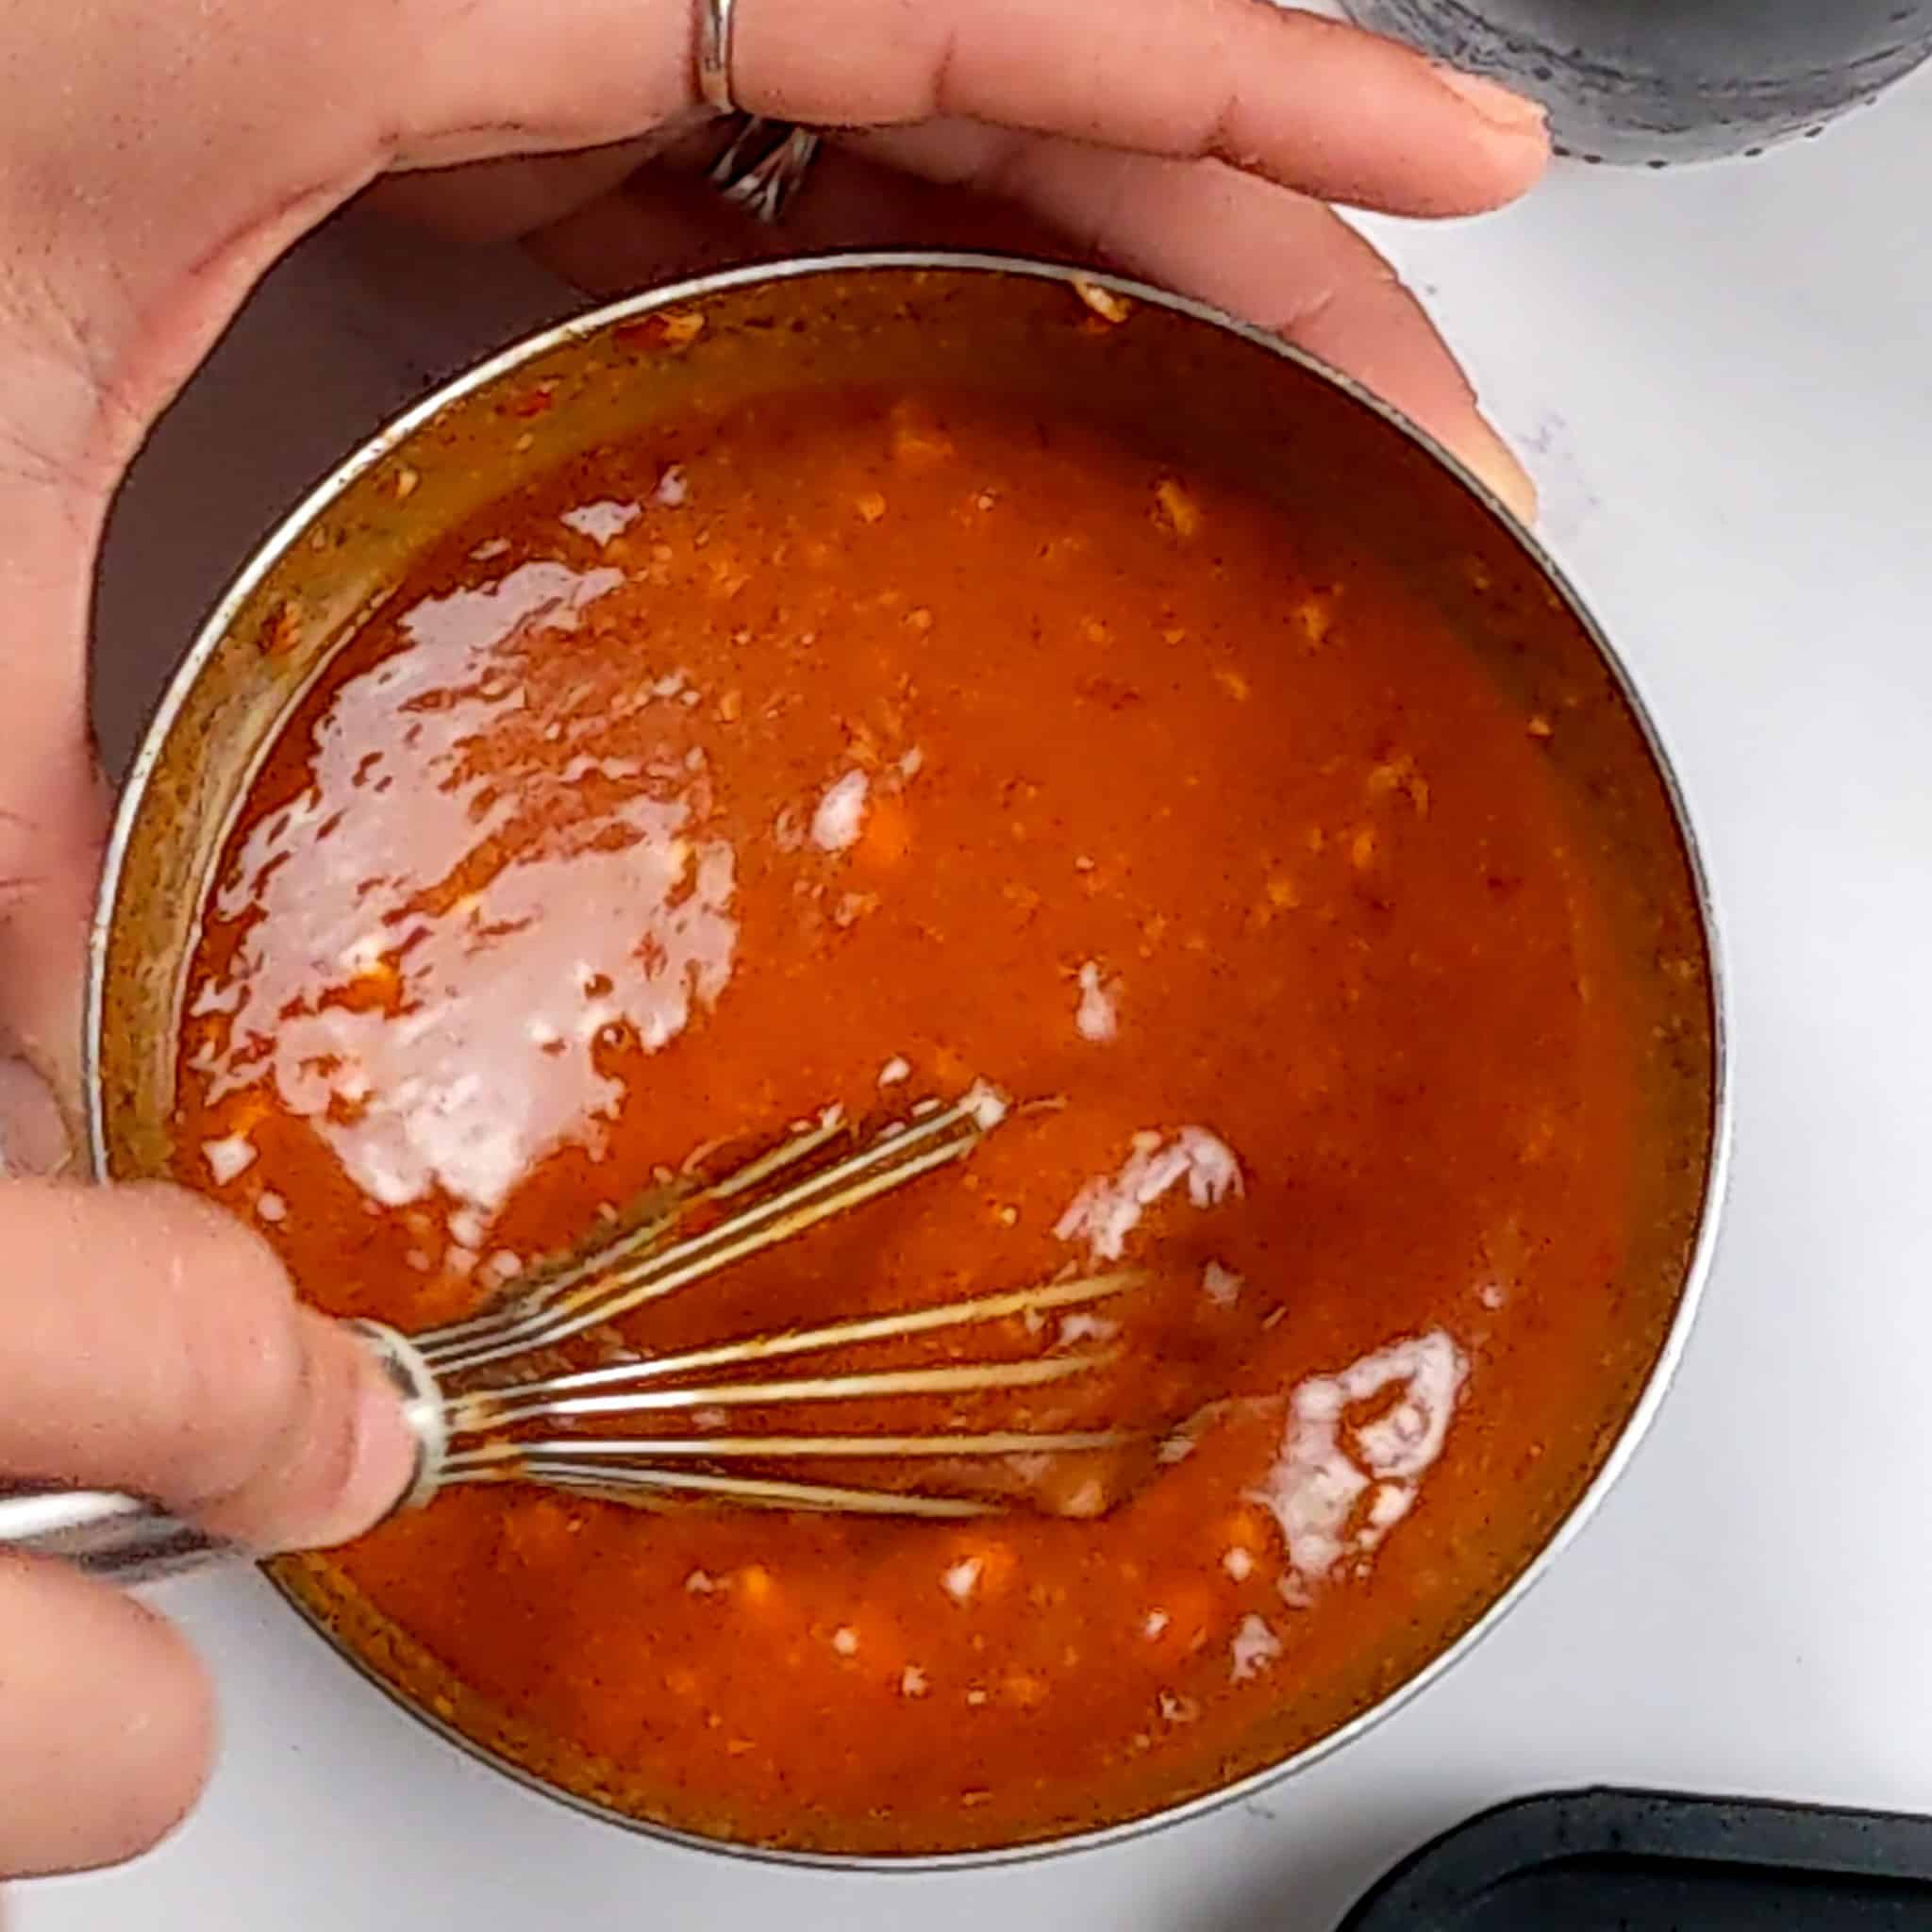 The garlic chili peanut sauce being whisked in a small stainless steel bowl.